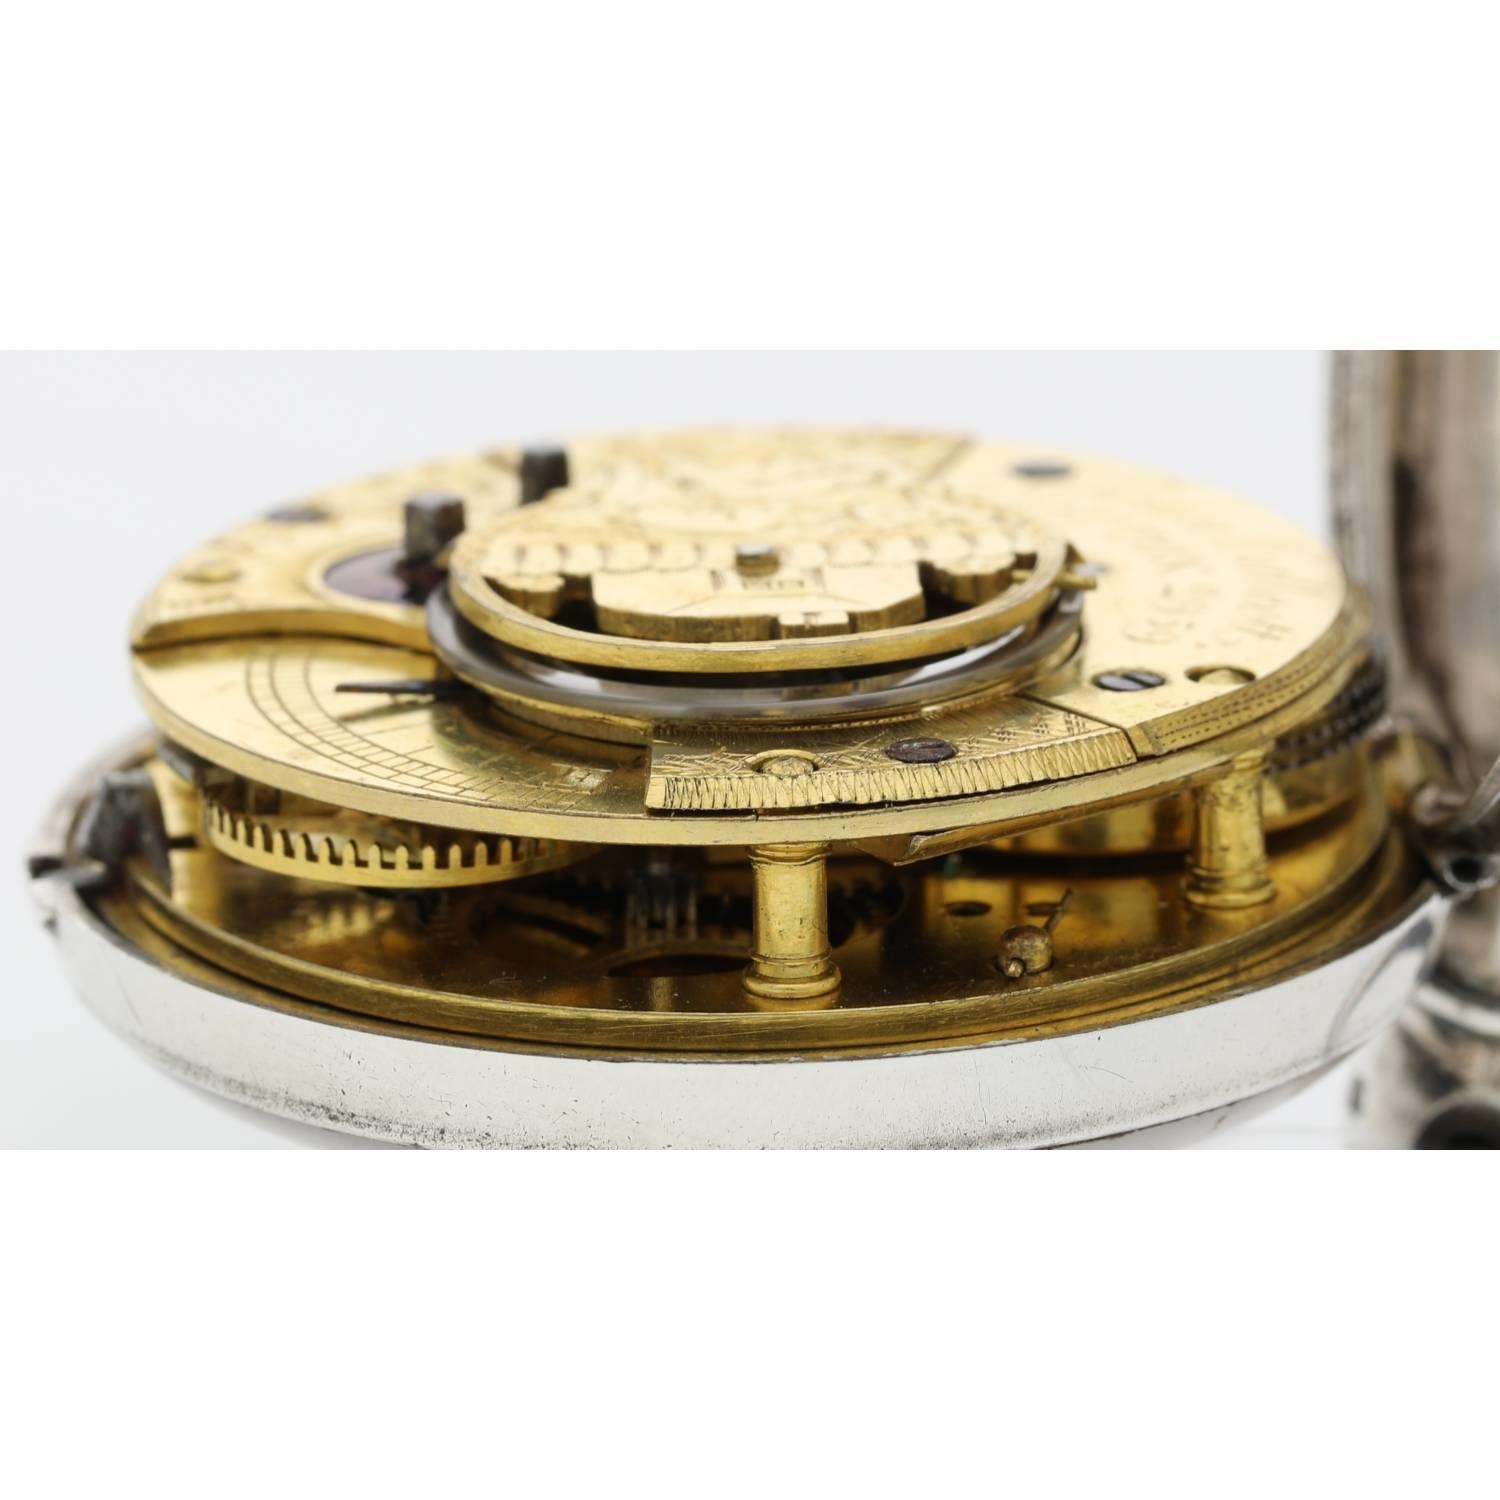 John Callcott, Cotton - rare 19th century English silver pair cased verge pocket watch, signed fusee - Image 7 of 10